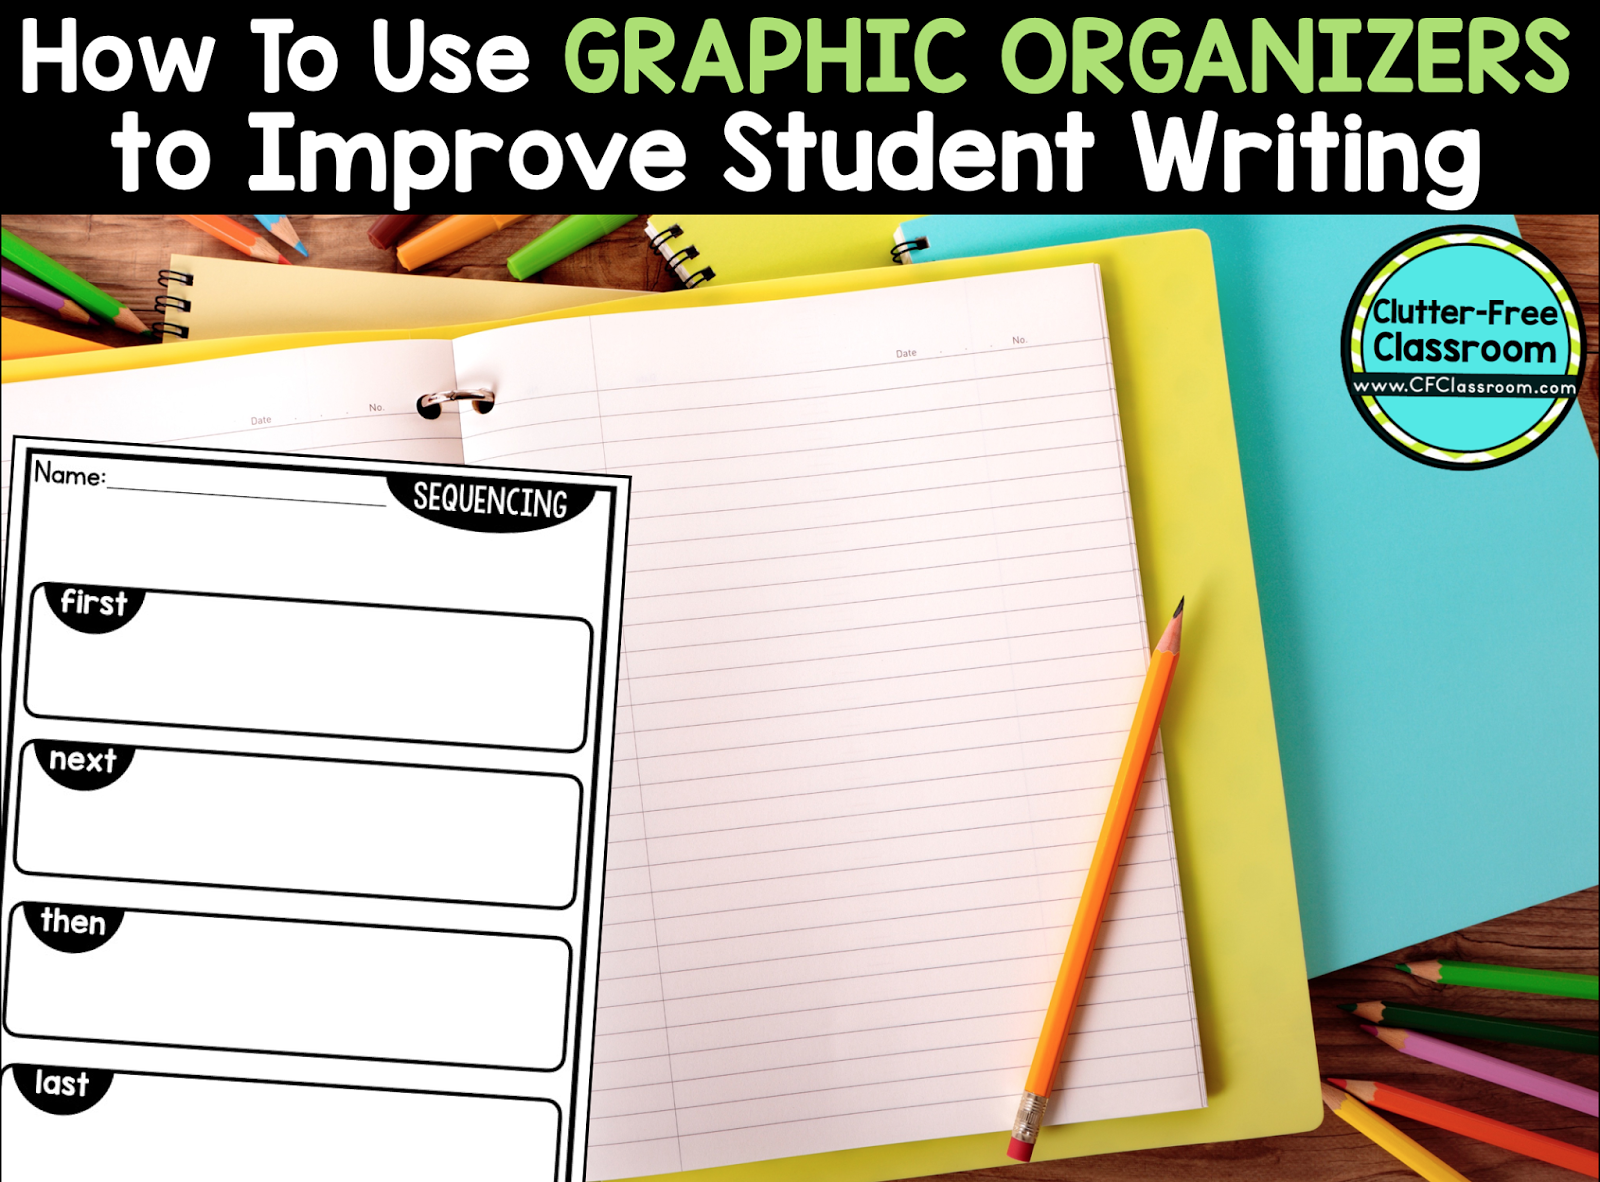 Would you like to improve your students' writing skills? Using graphic organizers for prewriting during the writing process will make it easier for students to organize their thinking and strengthen their writing abilities as well. This post explains how.